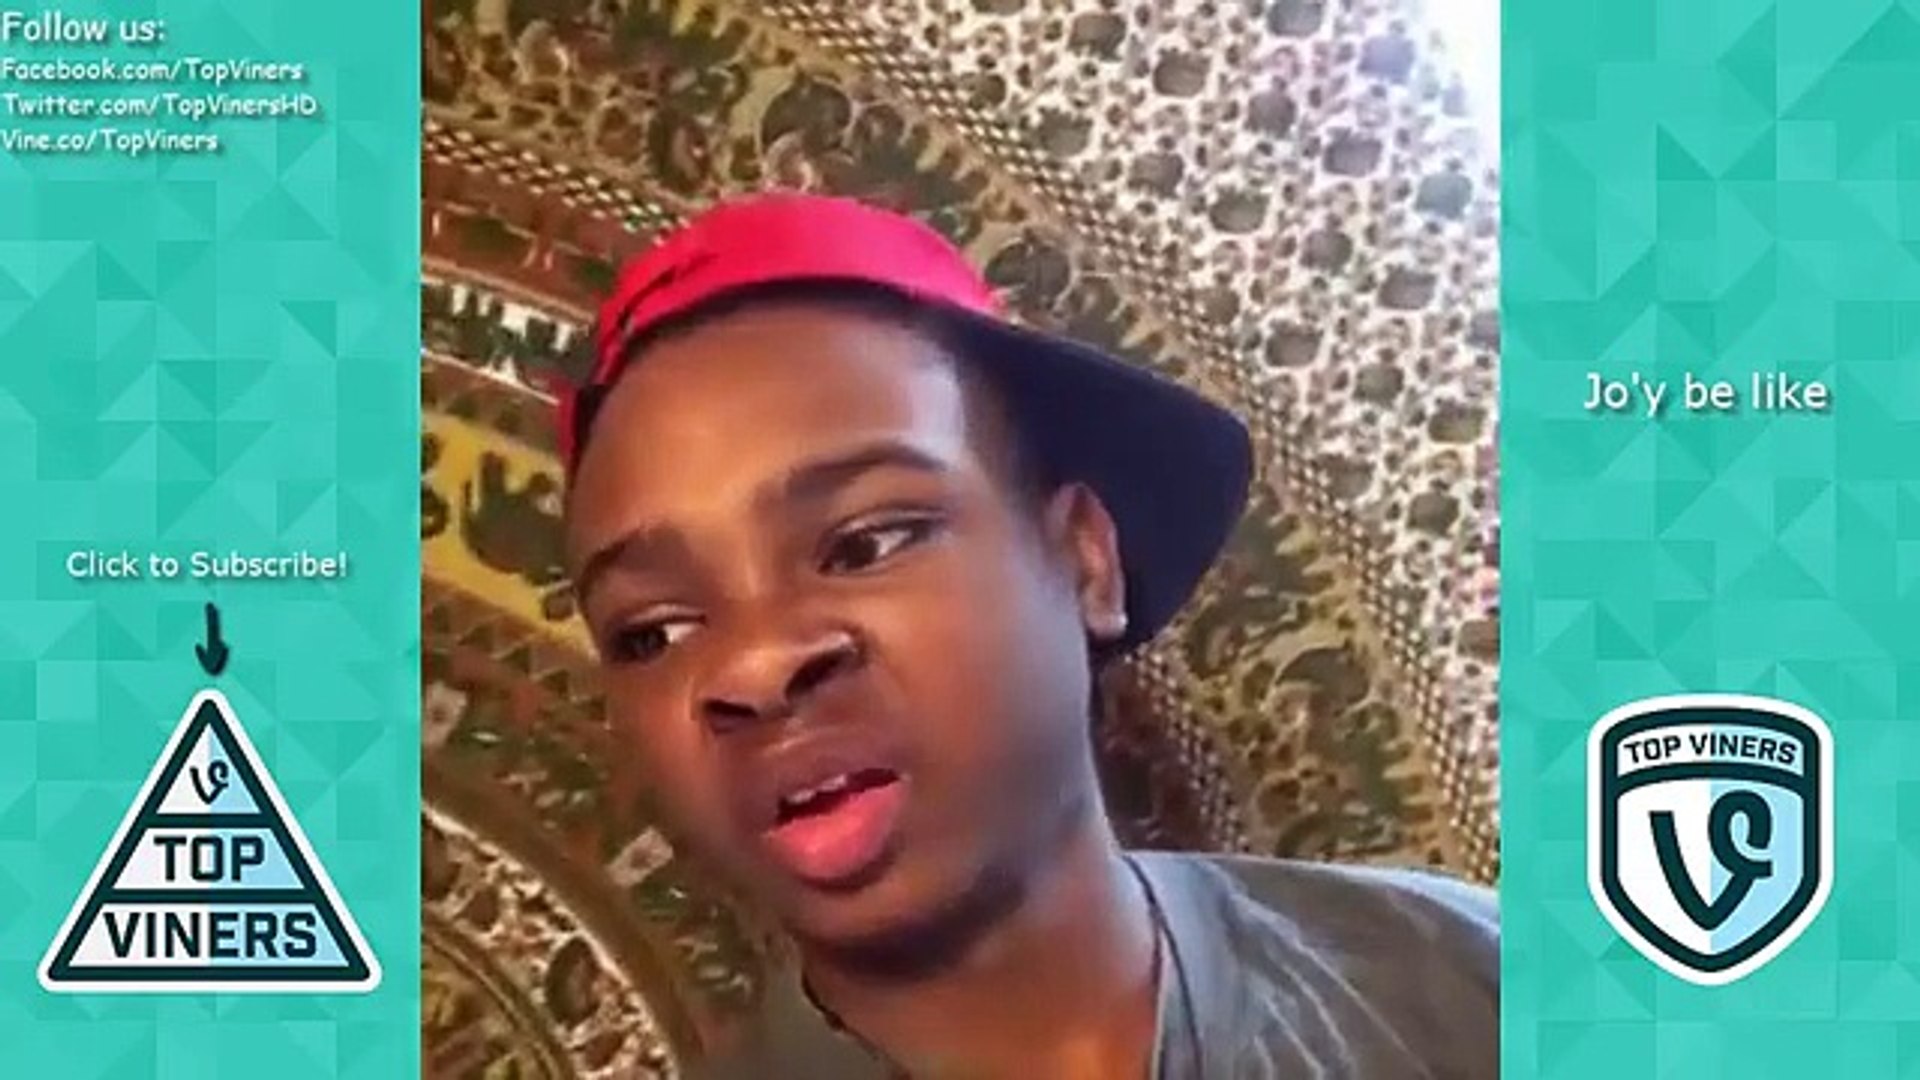 Jay Versace Vine Compilation with Titles! - BEST Jay Versace Vines - Top  Viners ✓ - video Dailymotion